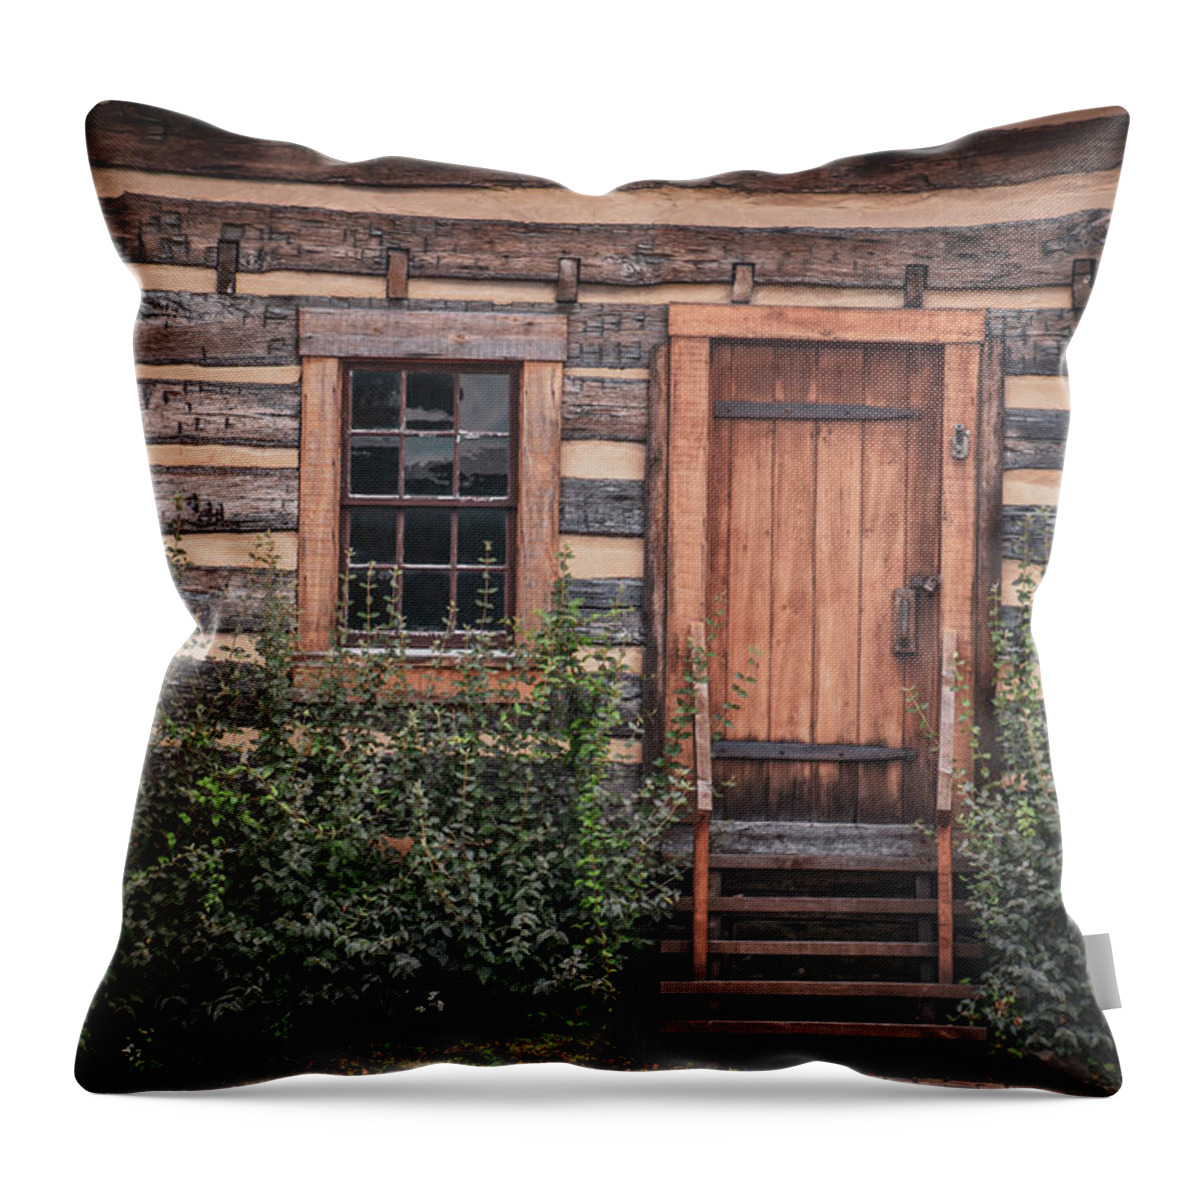 Cabin Throw Pillow featuring the photograph Cabin by Michelle Wittensoldner